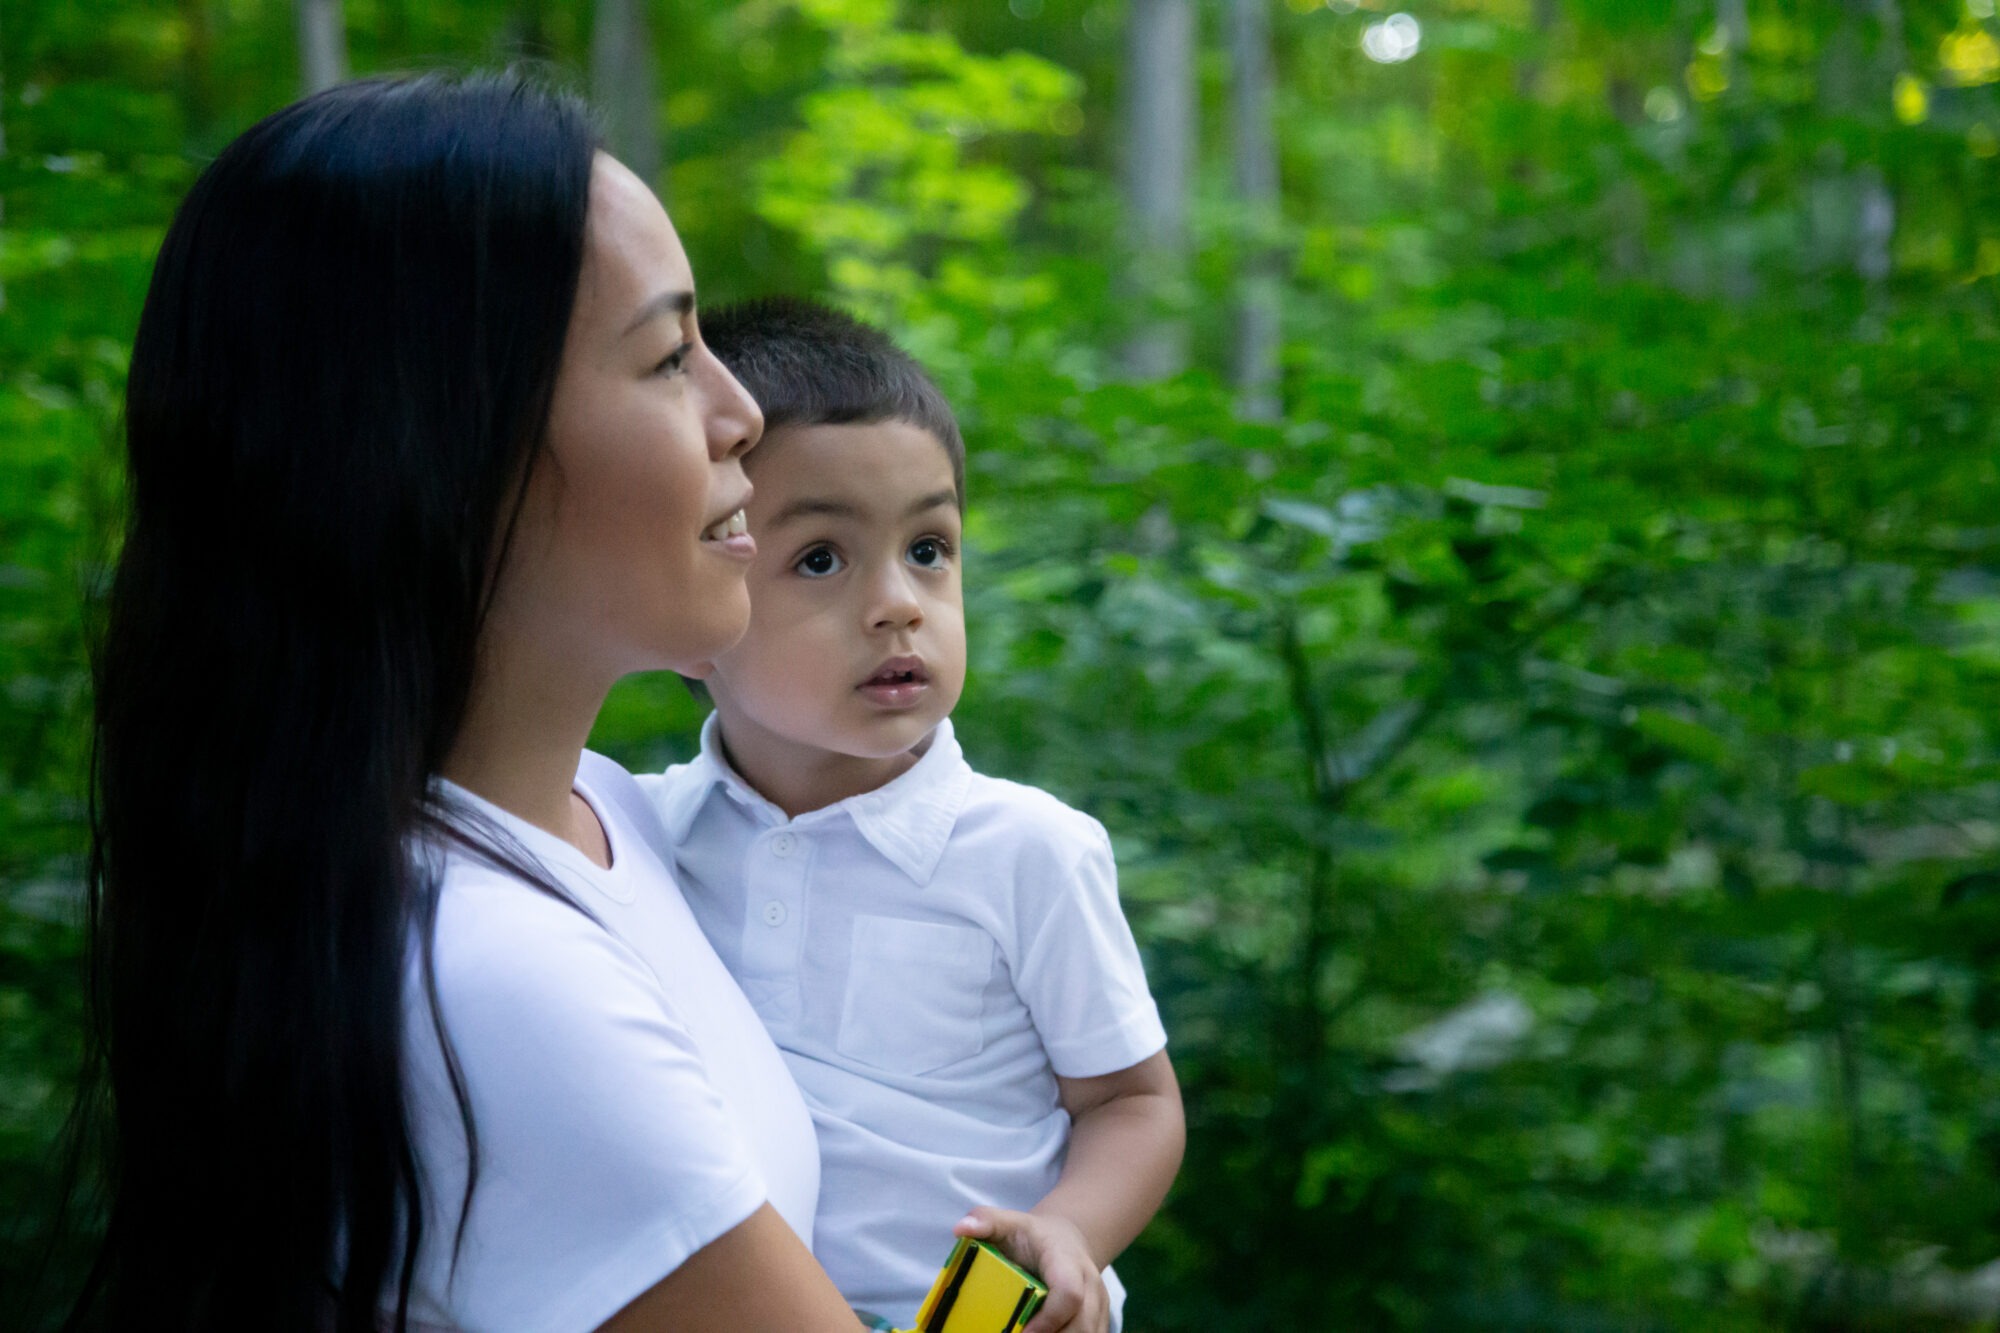 a woman holds her son, both look off camera. green trees and bushes can be seen behind them